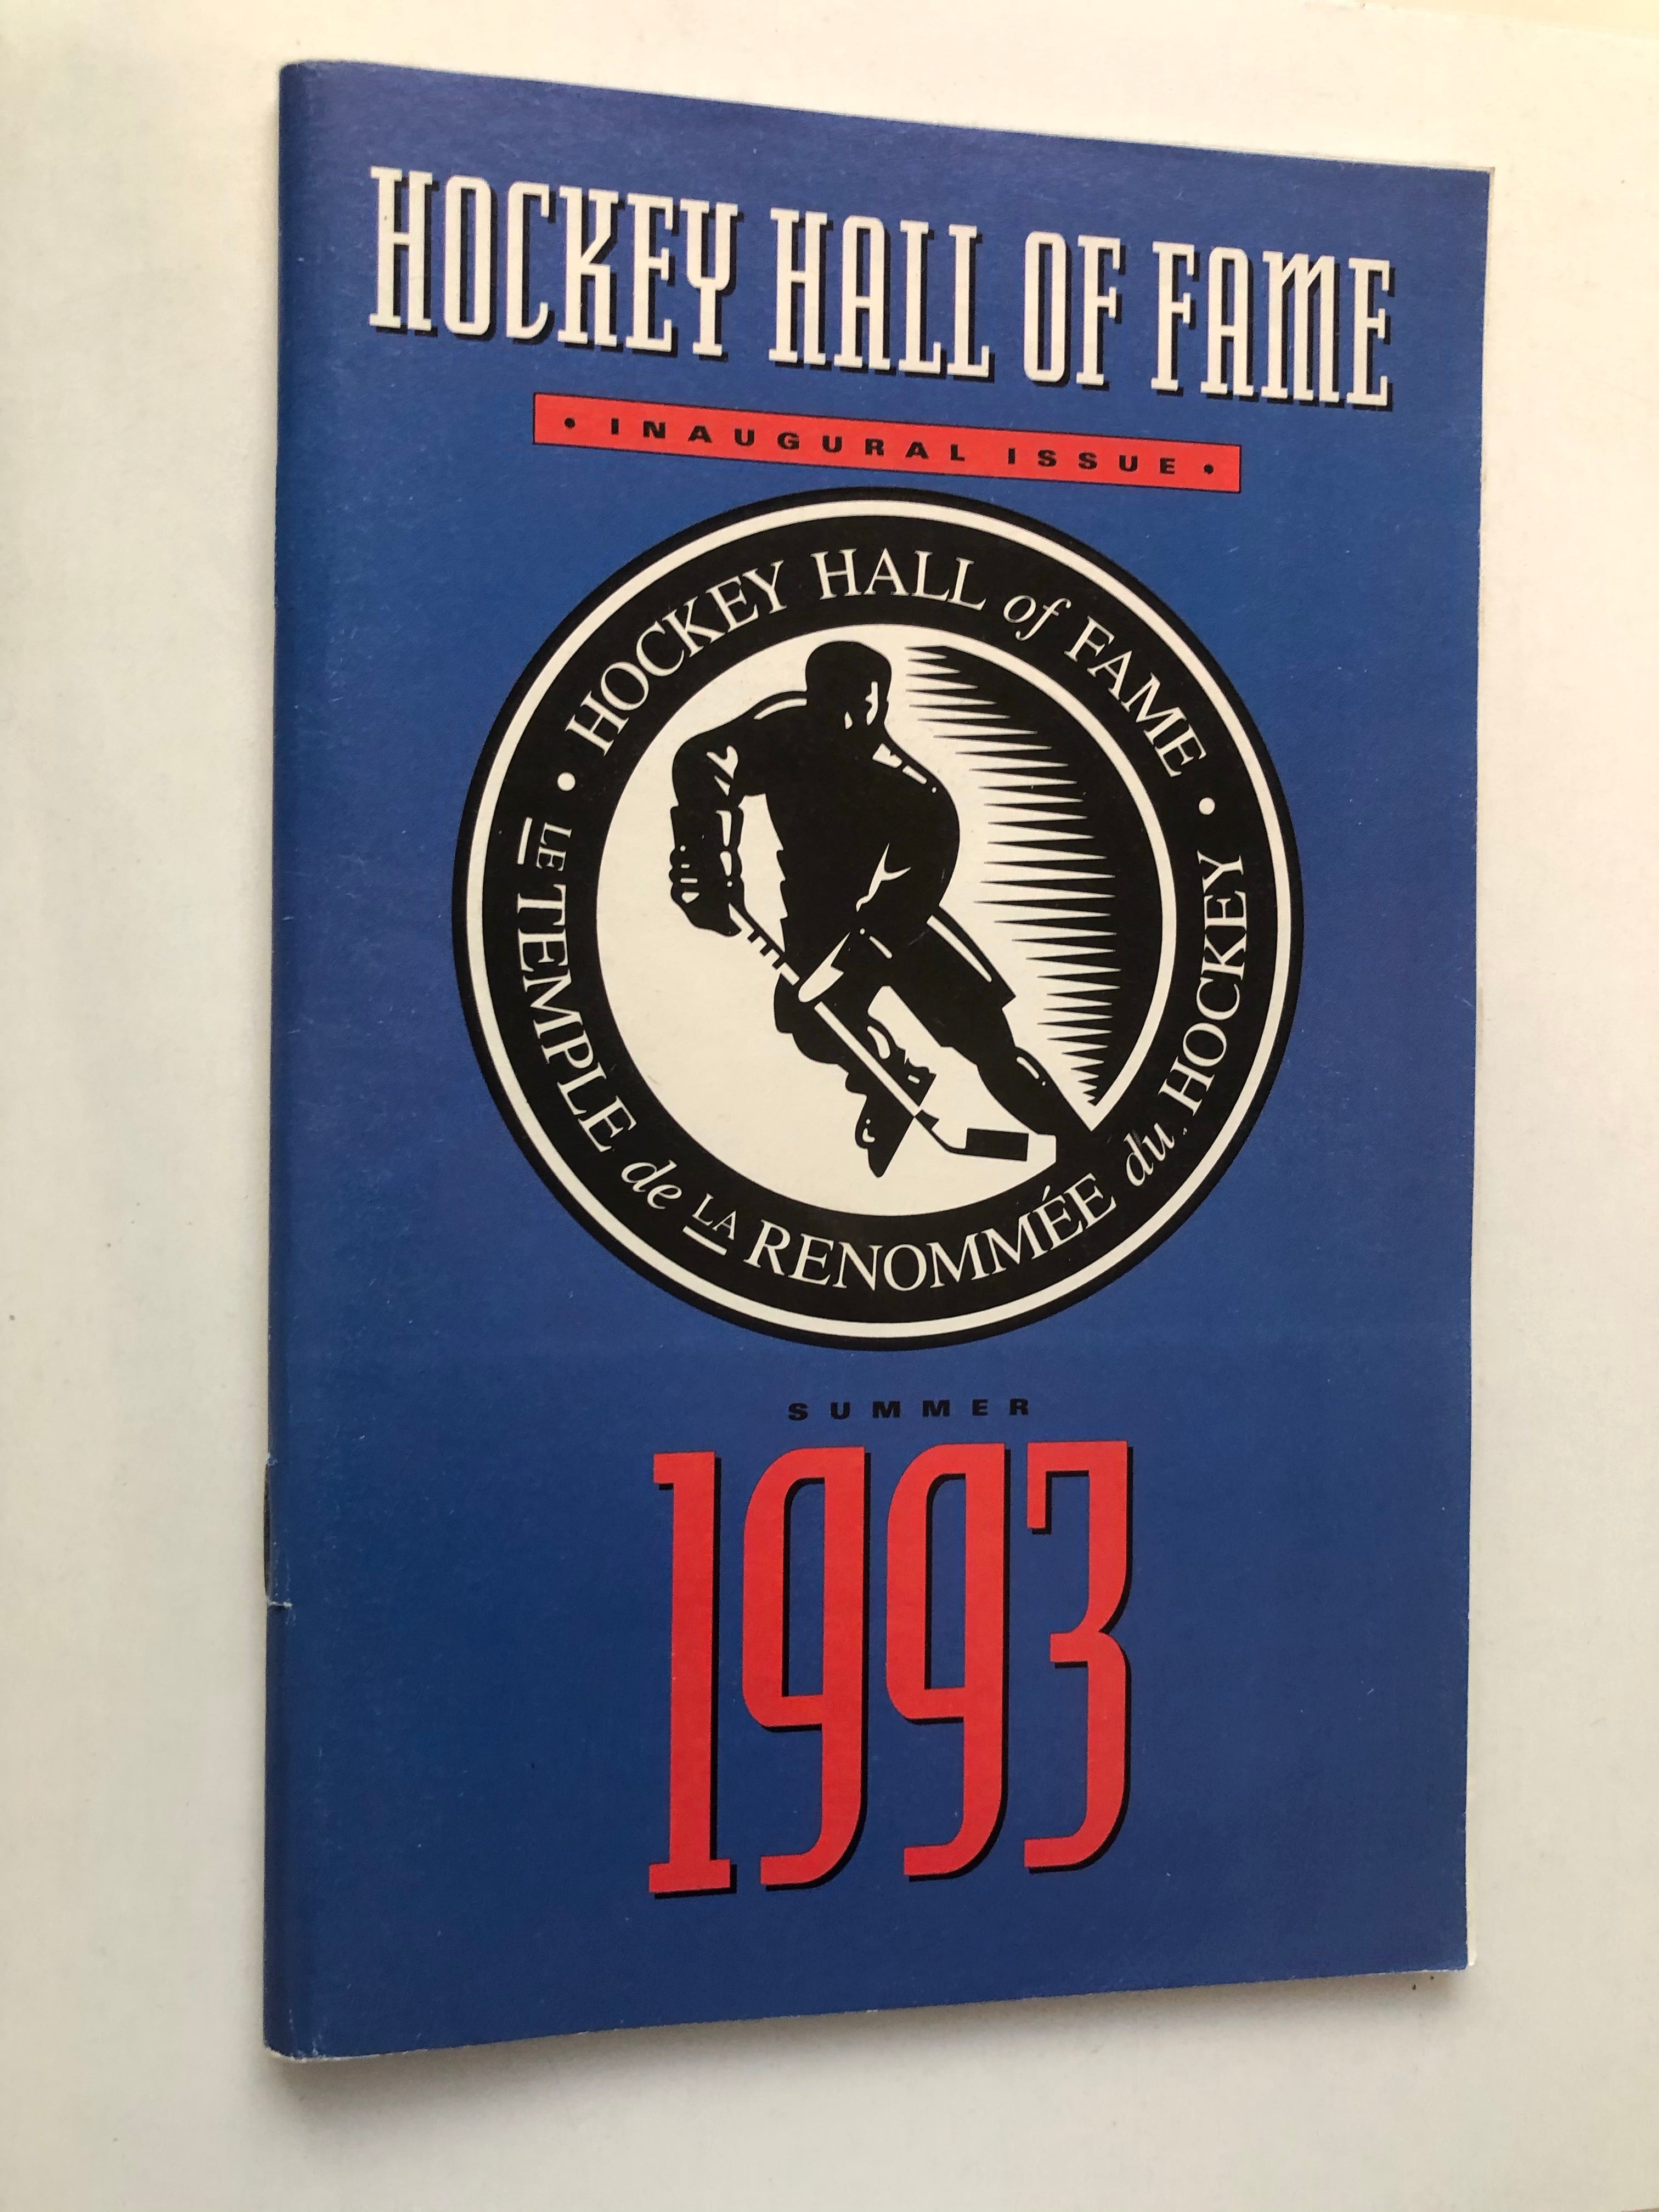 1993 Hockey Hall of Fame first issue booklet